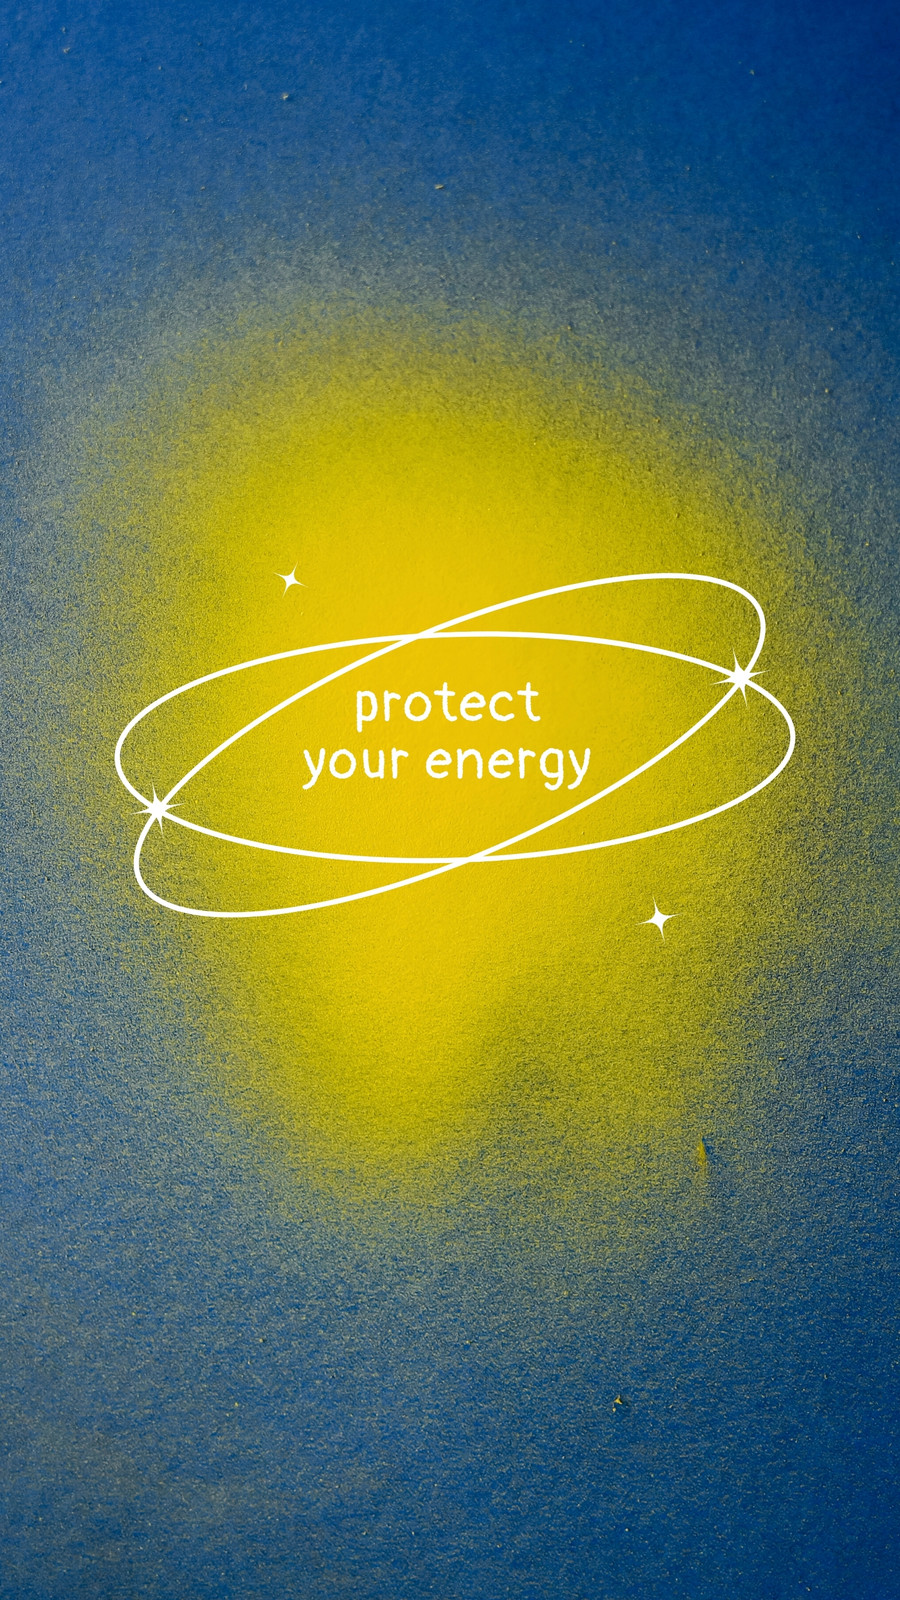 Protect your energy  Morning inspiration Wallpaper Phone wallpaper